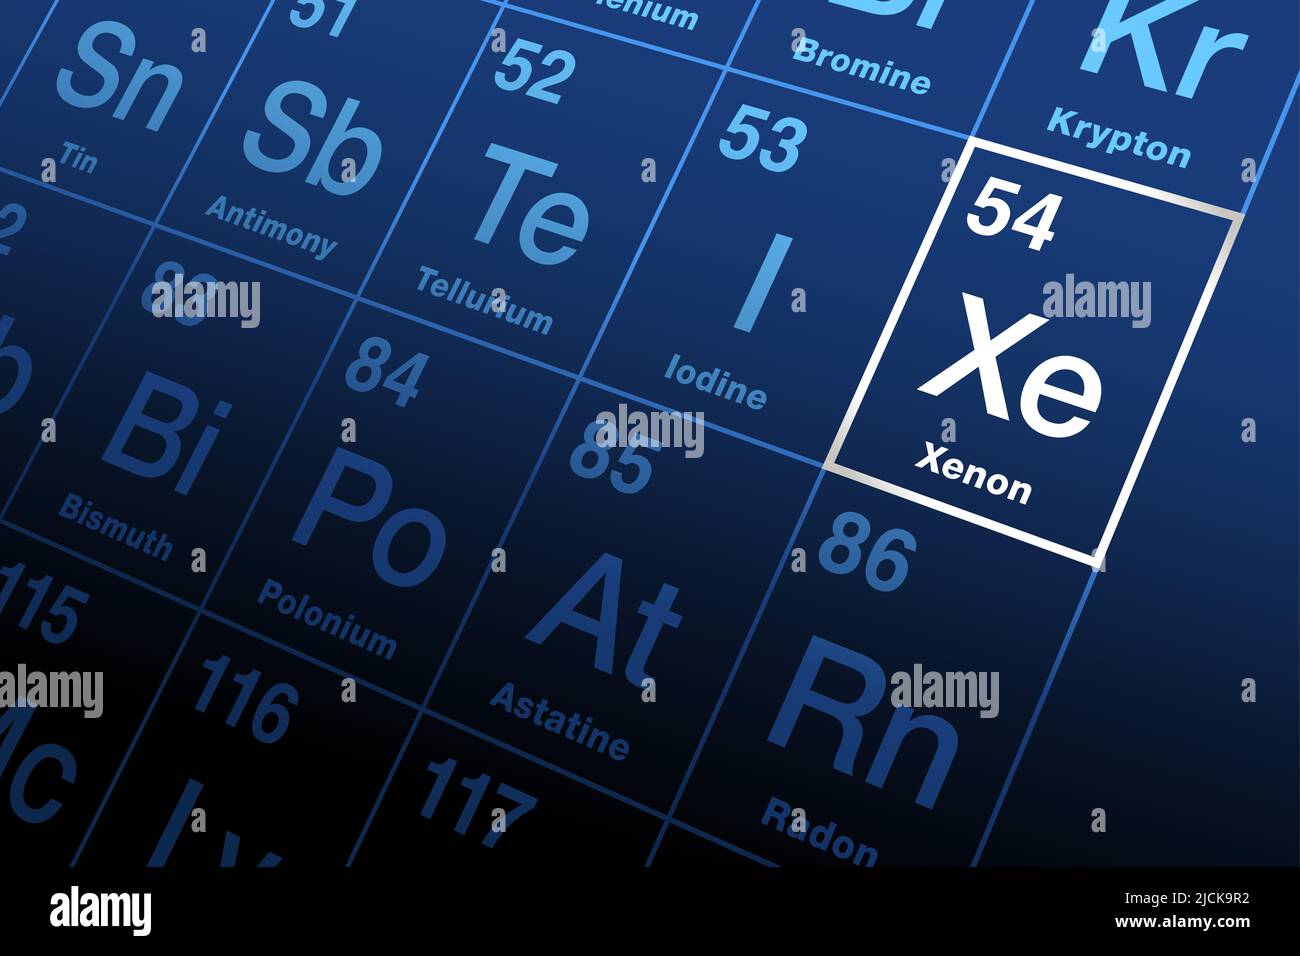 Xenon on periodic table of the elements. Noble gas with symbol Xe from Greek xenon, meaning foreign, and with atomic number 54. Stock Photo